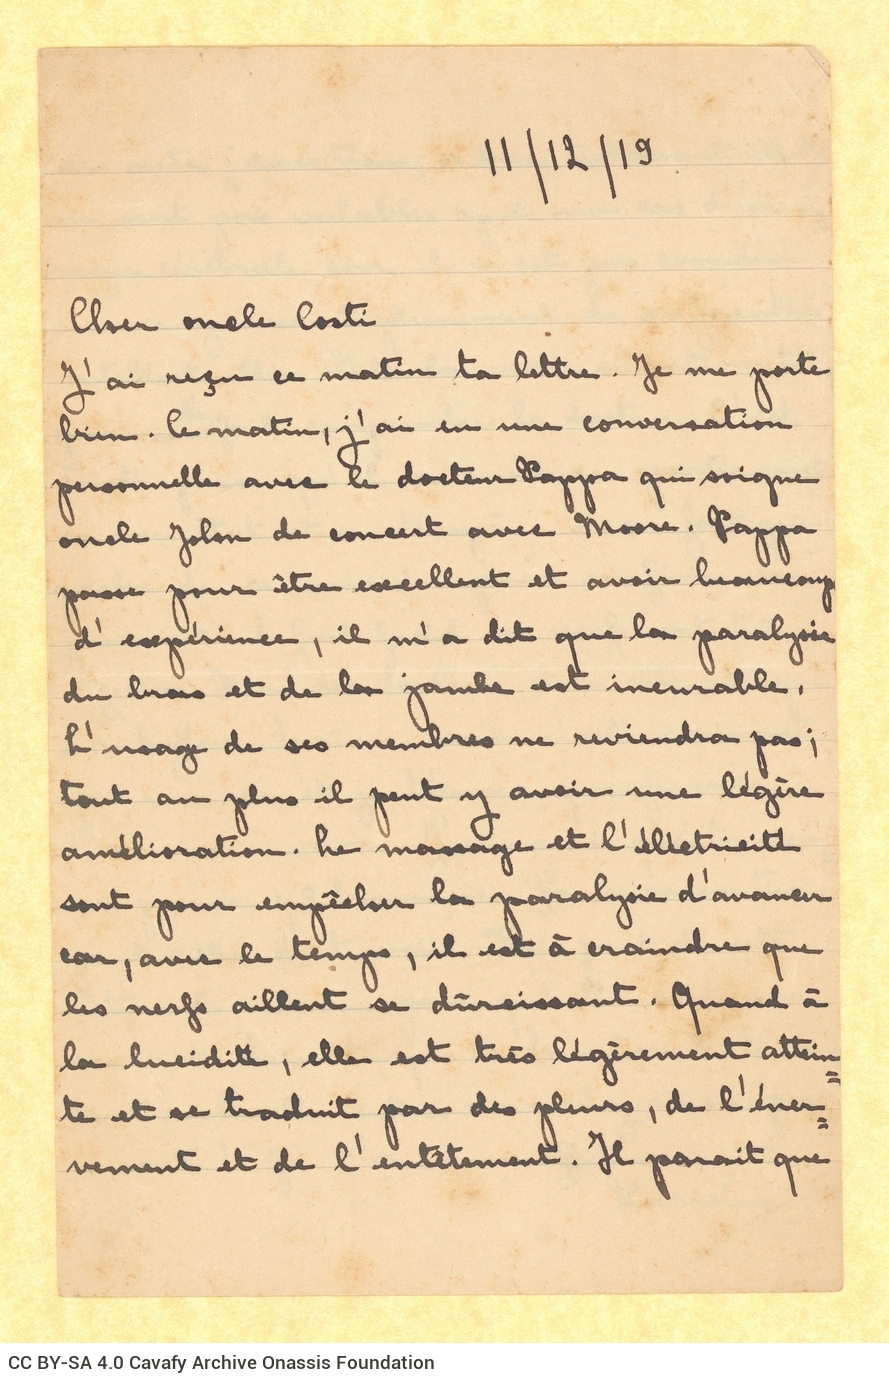 Handwritten letter by Charikleia A. Cavafy, niece of C. P. Cavafy, in the first page of a bifolio. It is a reply to a letter 